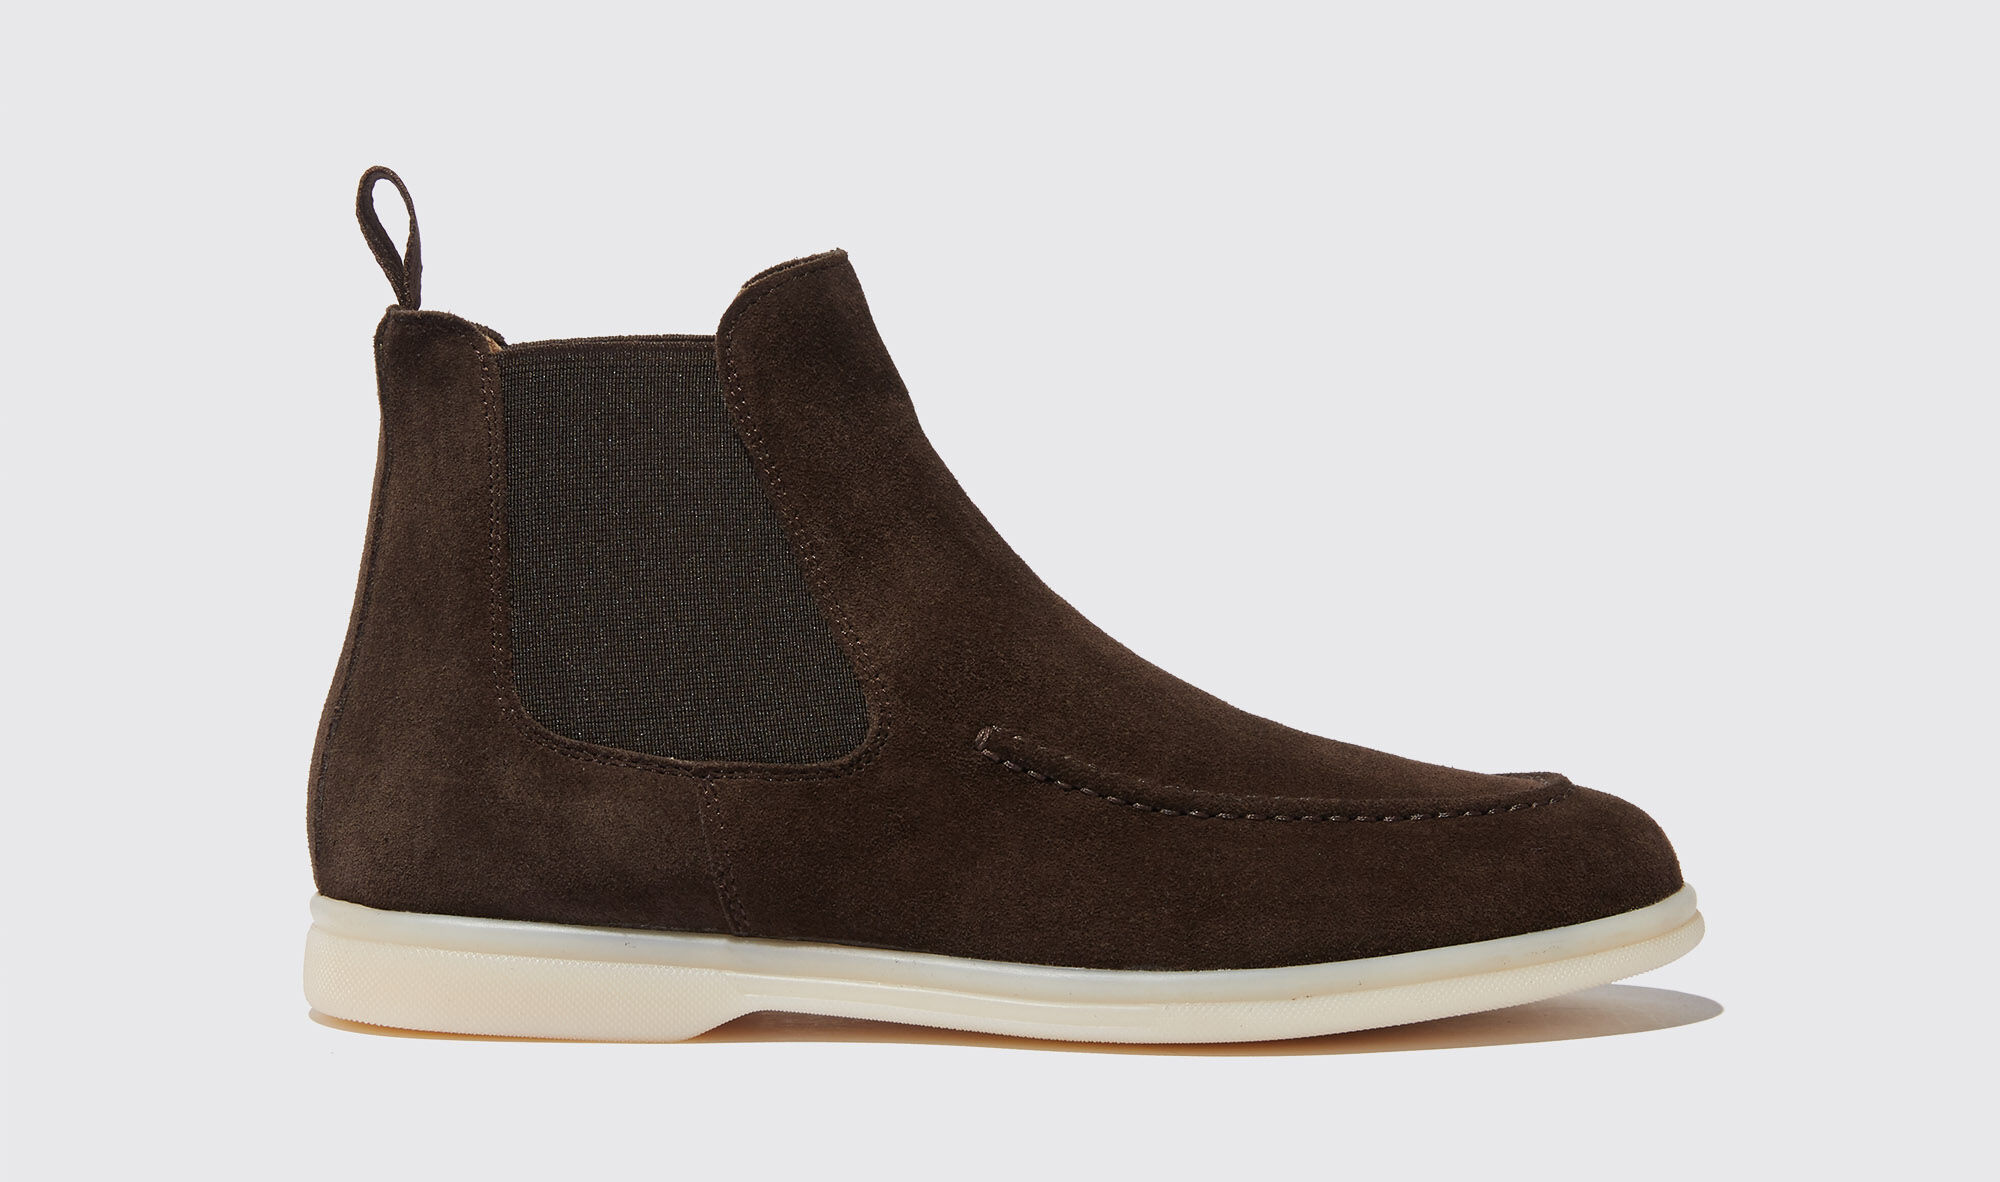 Scarosso Eugenia Moro Scamosciata - Donna Chelsea Boots Brown - Suede Leather 38